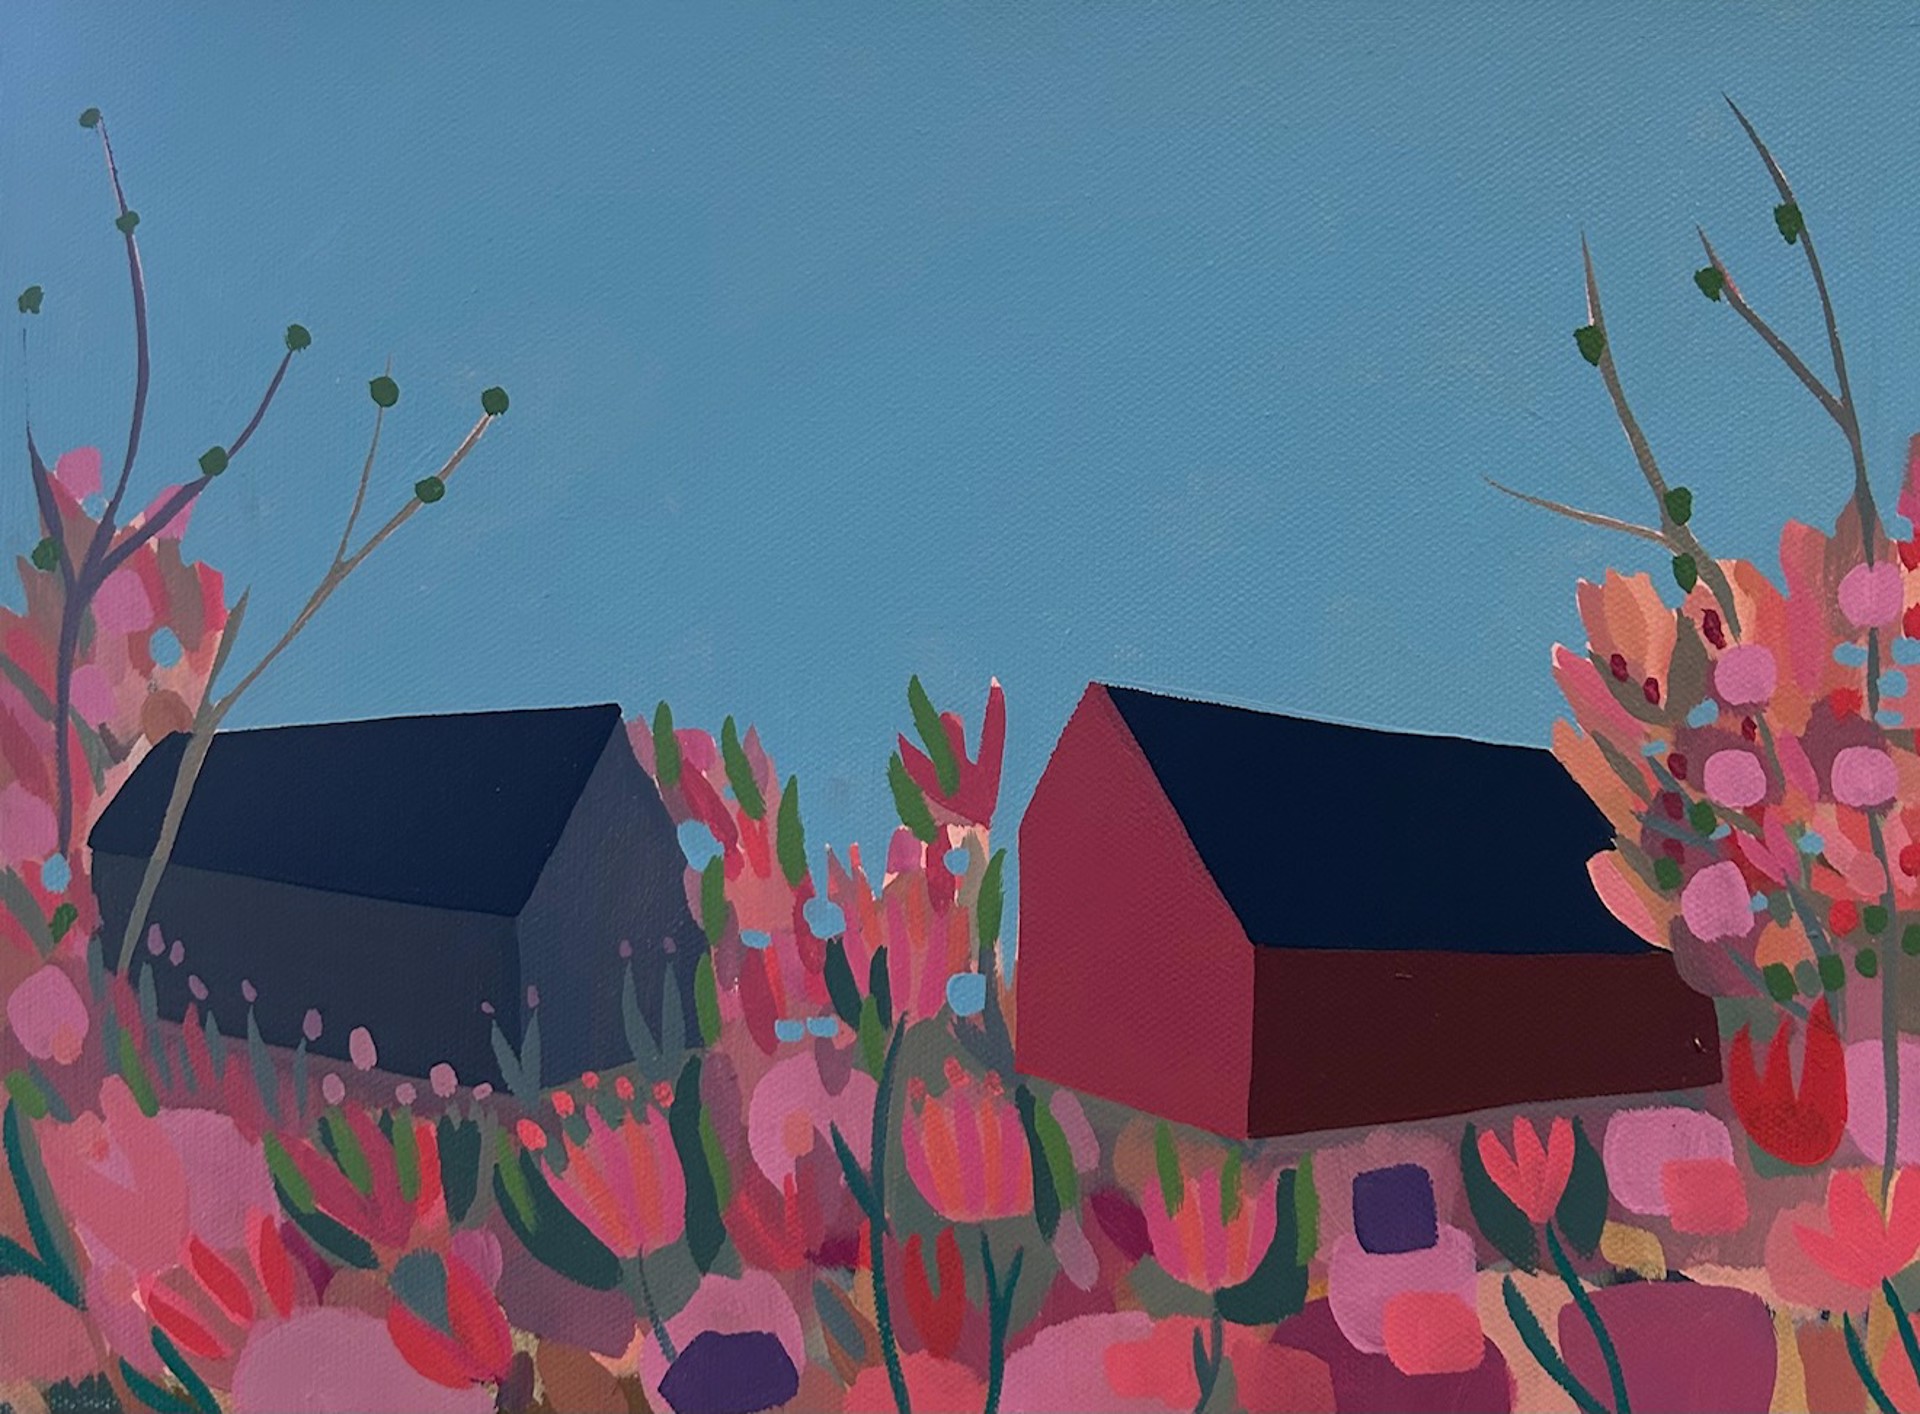 Transition of seasons, with Red and Blue Barn by Sage Tucker-Ketcham